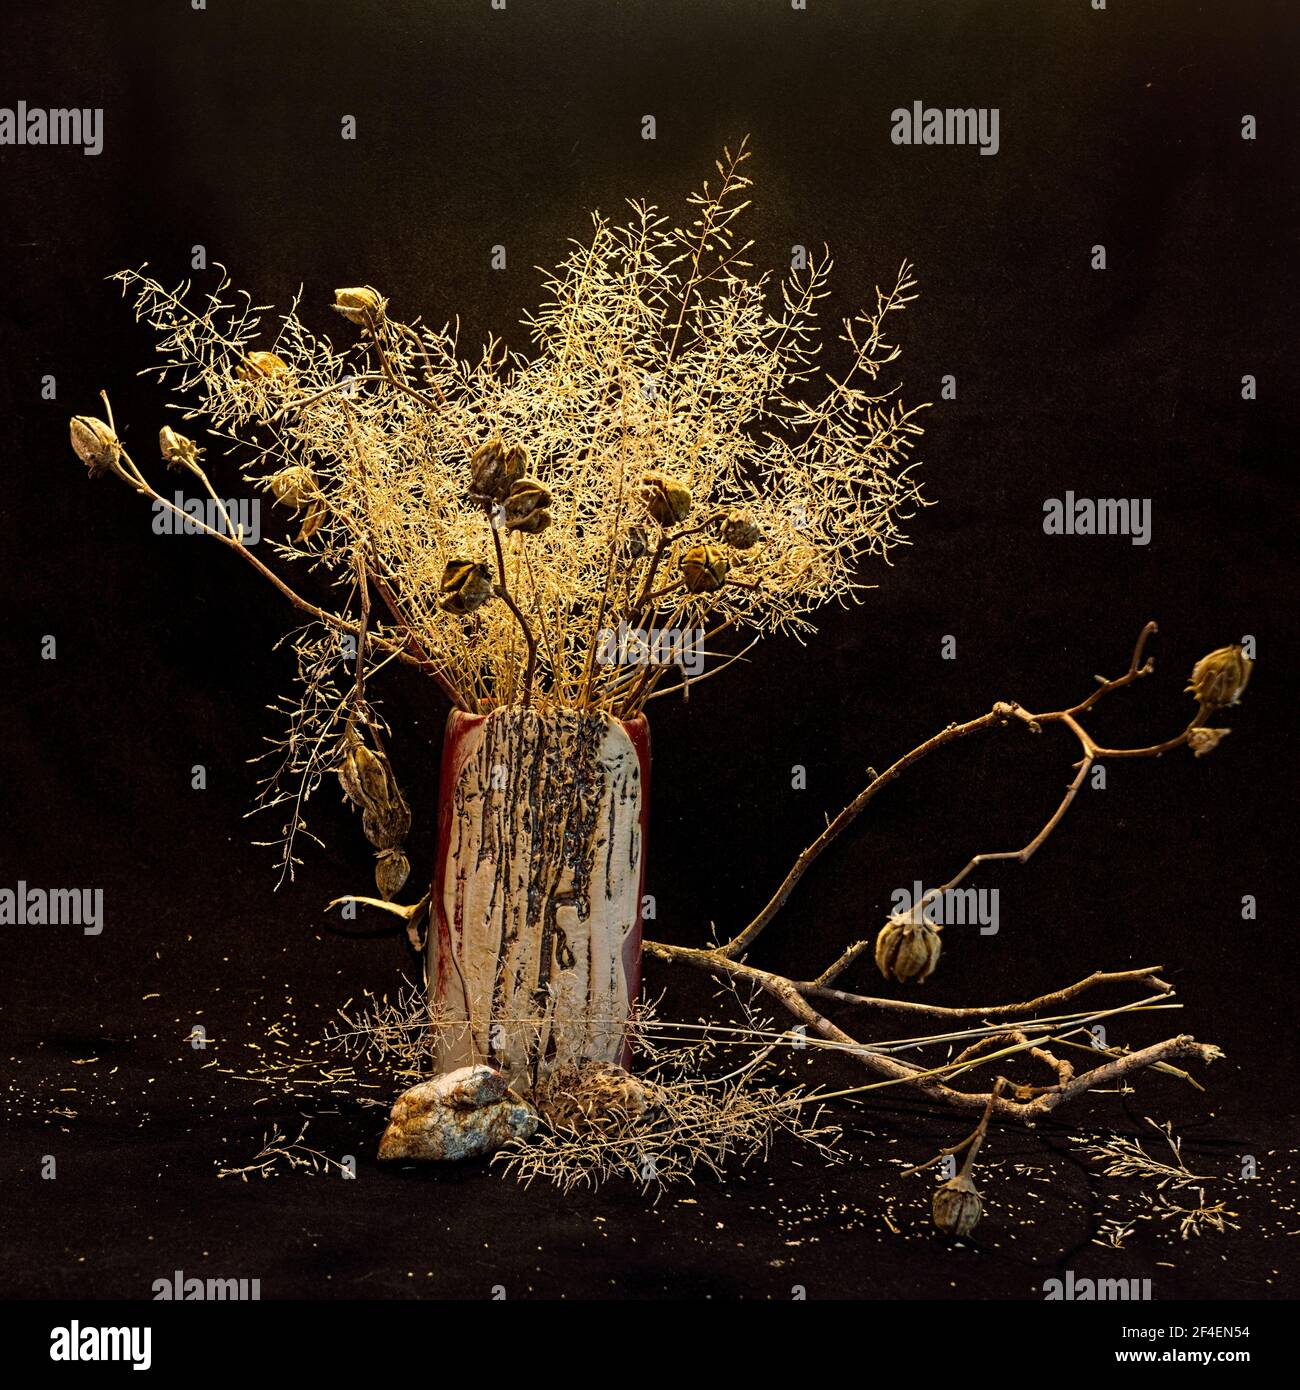 Wild native grass and seed pods in a rustic vase against a grungy textured dark backgound. Stock Photo